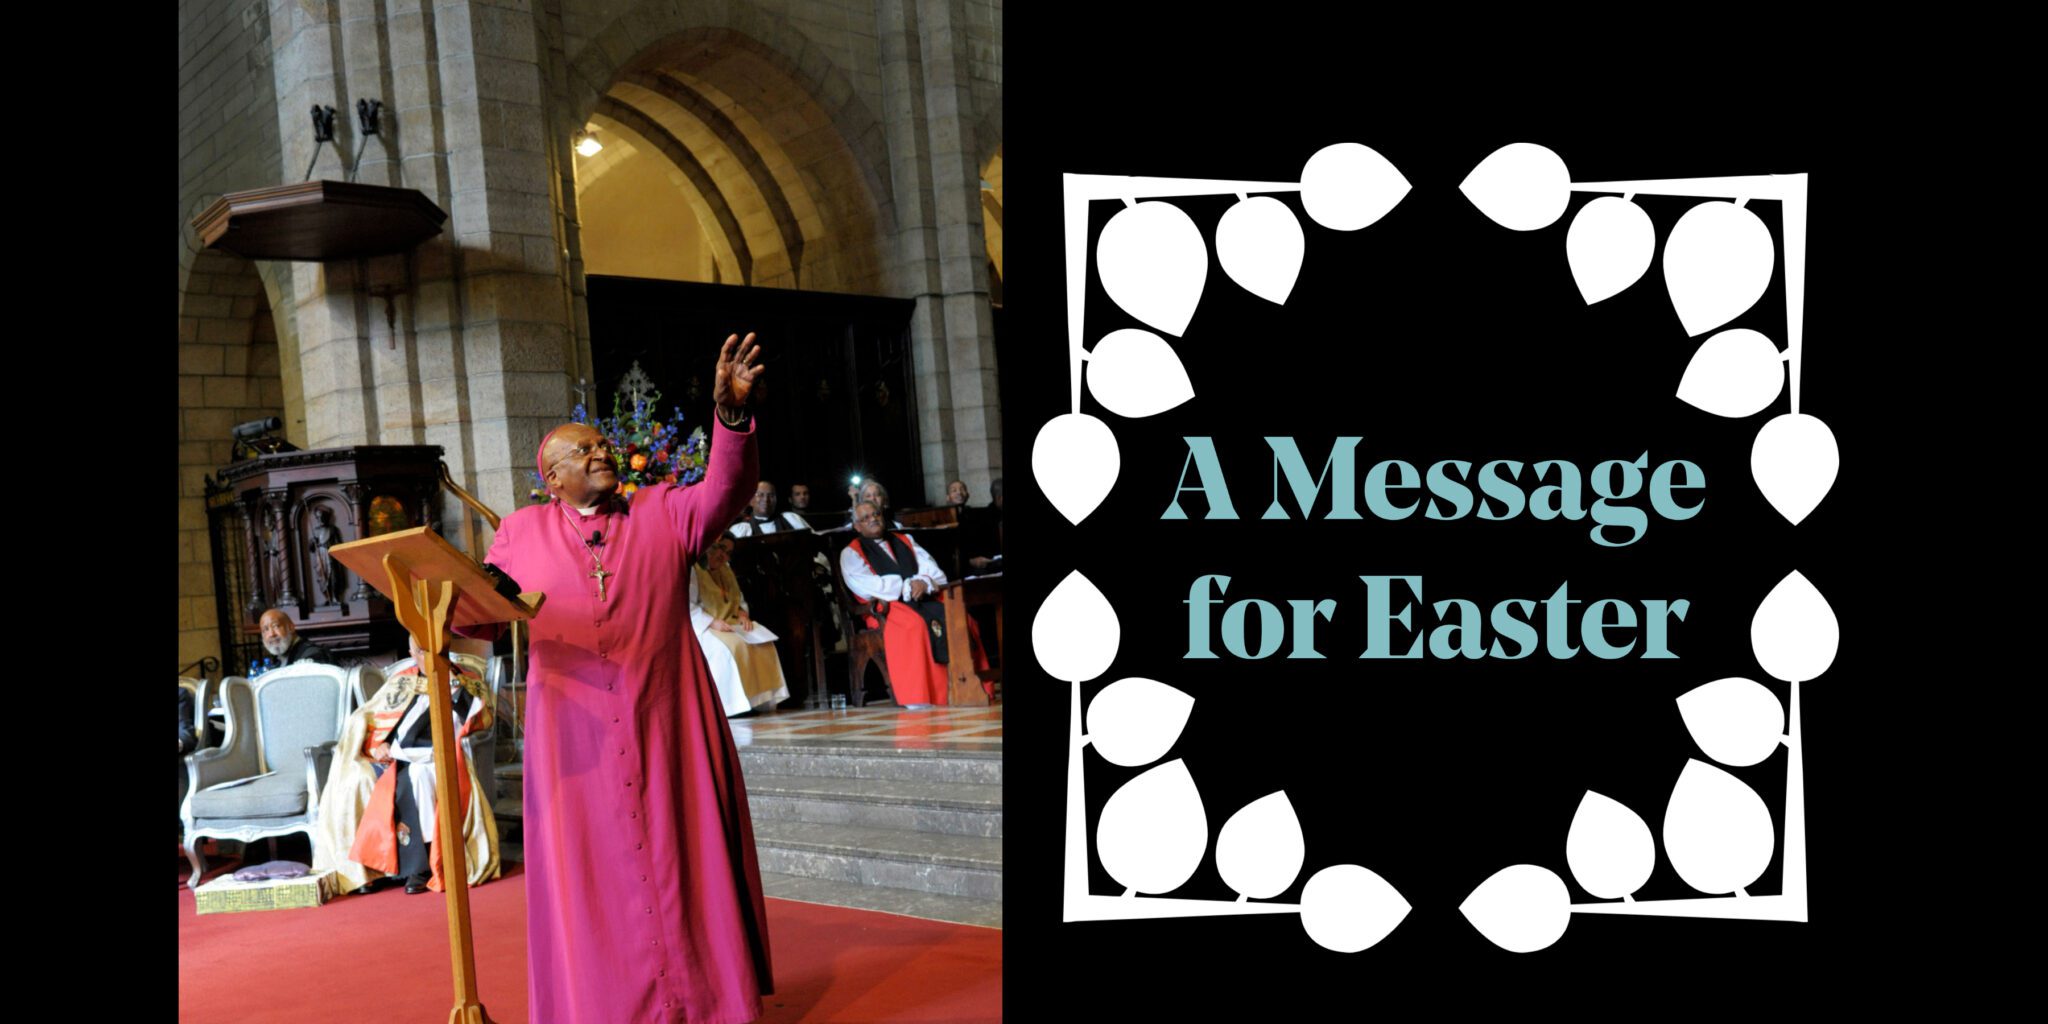 Desmond Tutu’s Message of Love and Peace for Easter